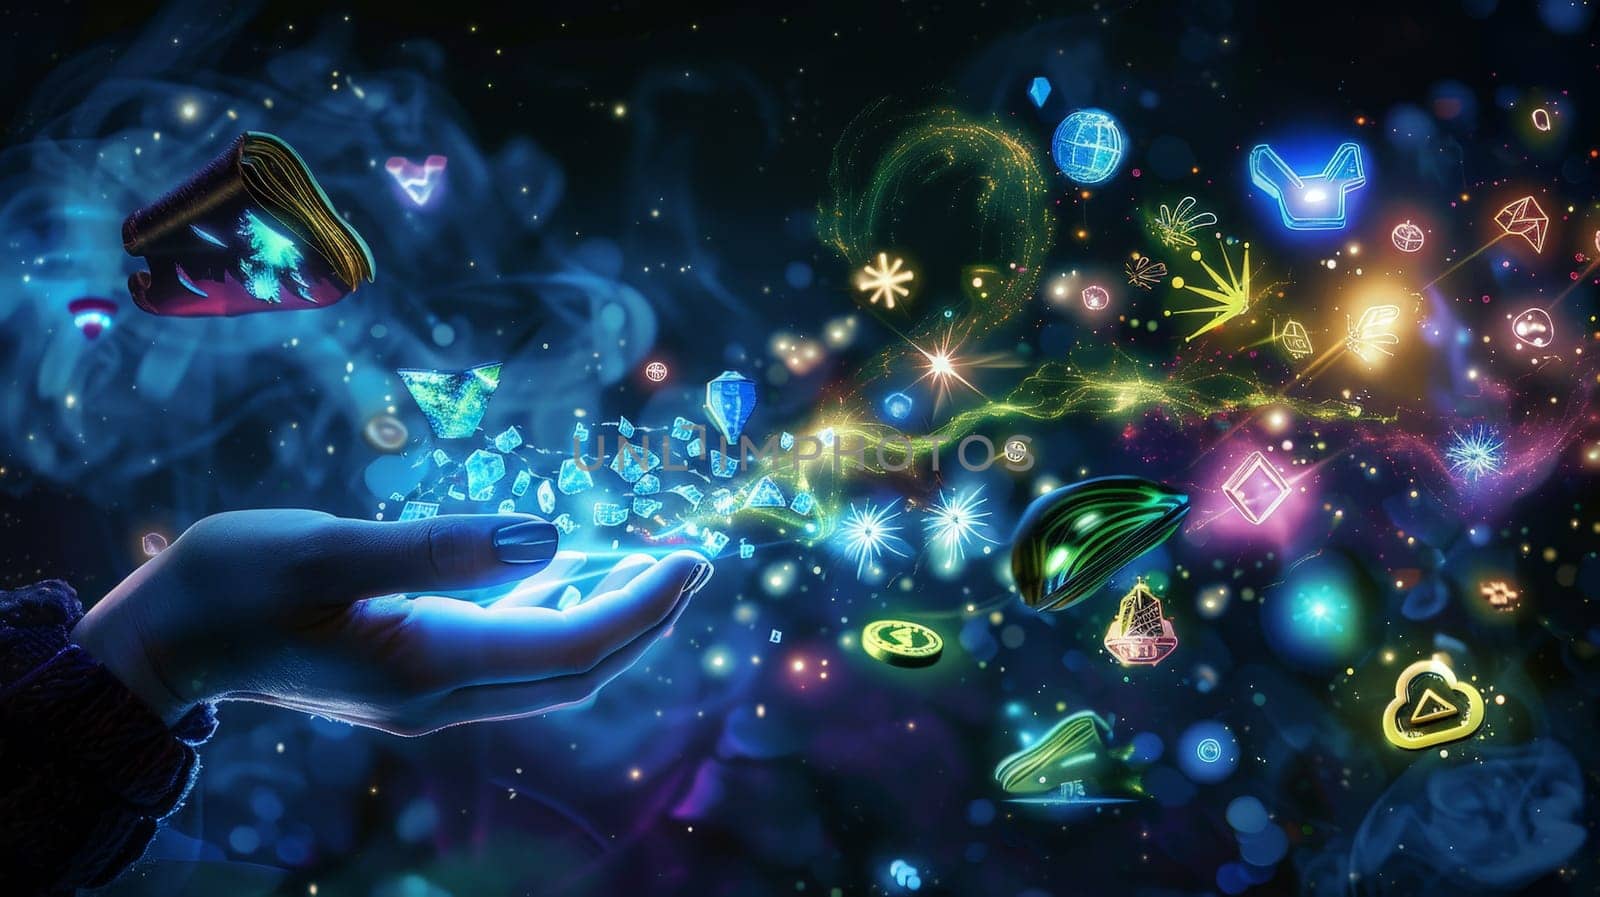 A hand is holding a glowing object that is surrounded by a colorful, swirling mass of symbols and shapes. Concept of wonder and mystery, as if the hand is holding a magical or otherworldly object